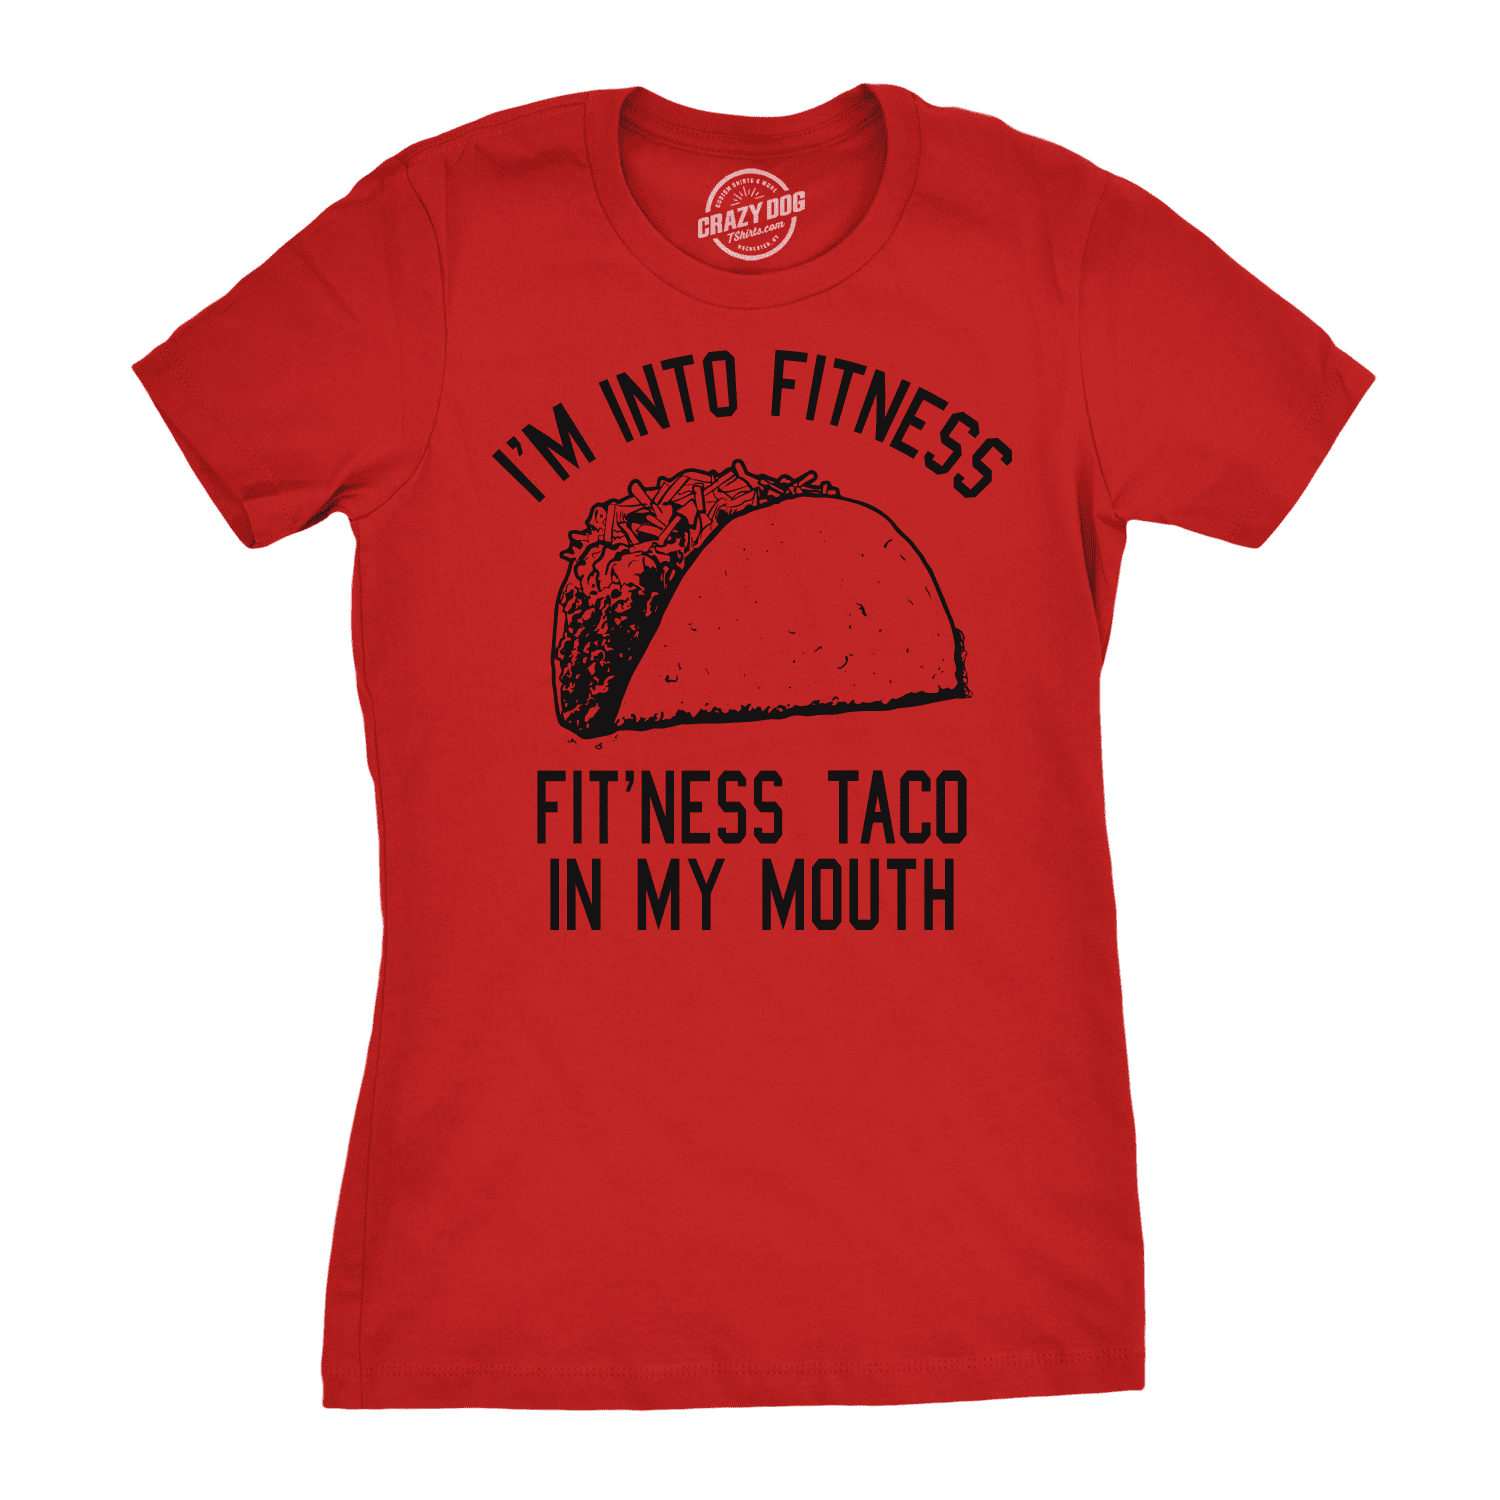 I'm Into Fitness Fit'ness Taco in My Mouth  Women's V-Neck T-shirt Foodie Tee 